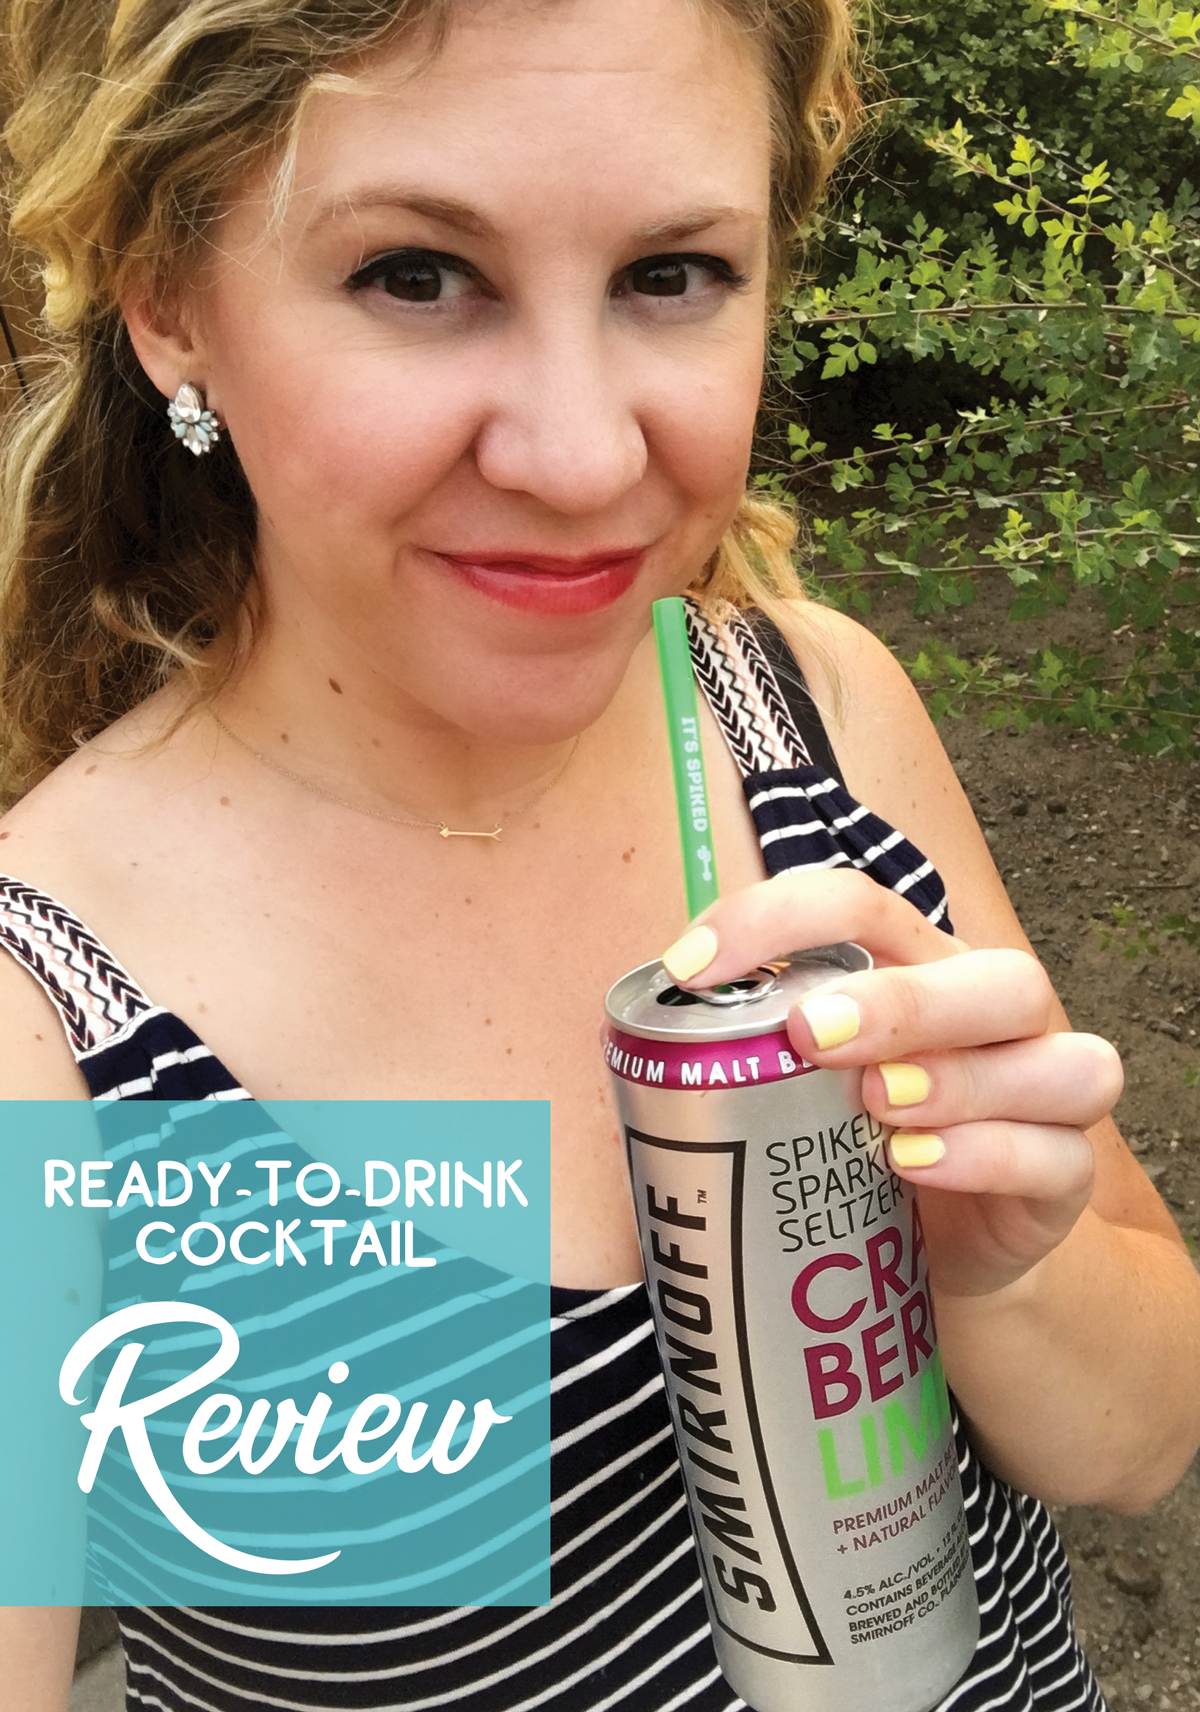 Canned cocktail review of Smirnoff Spiked Sparkling Seltzer